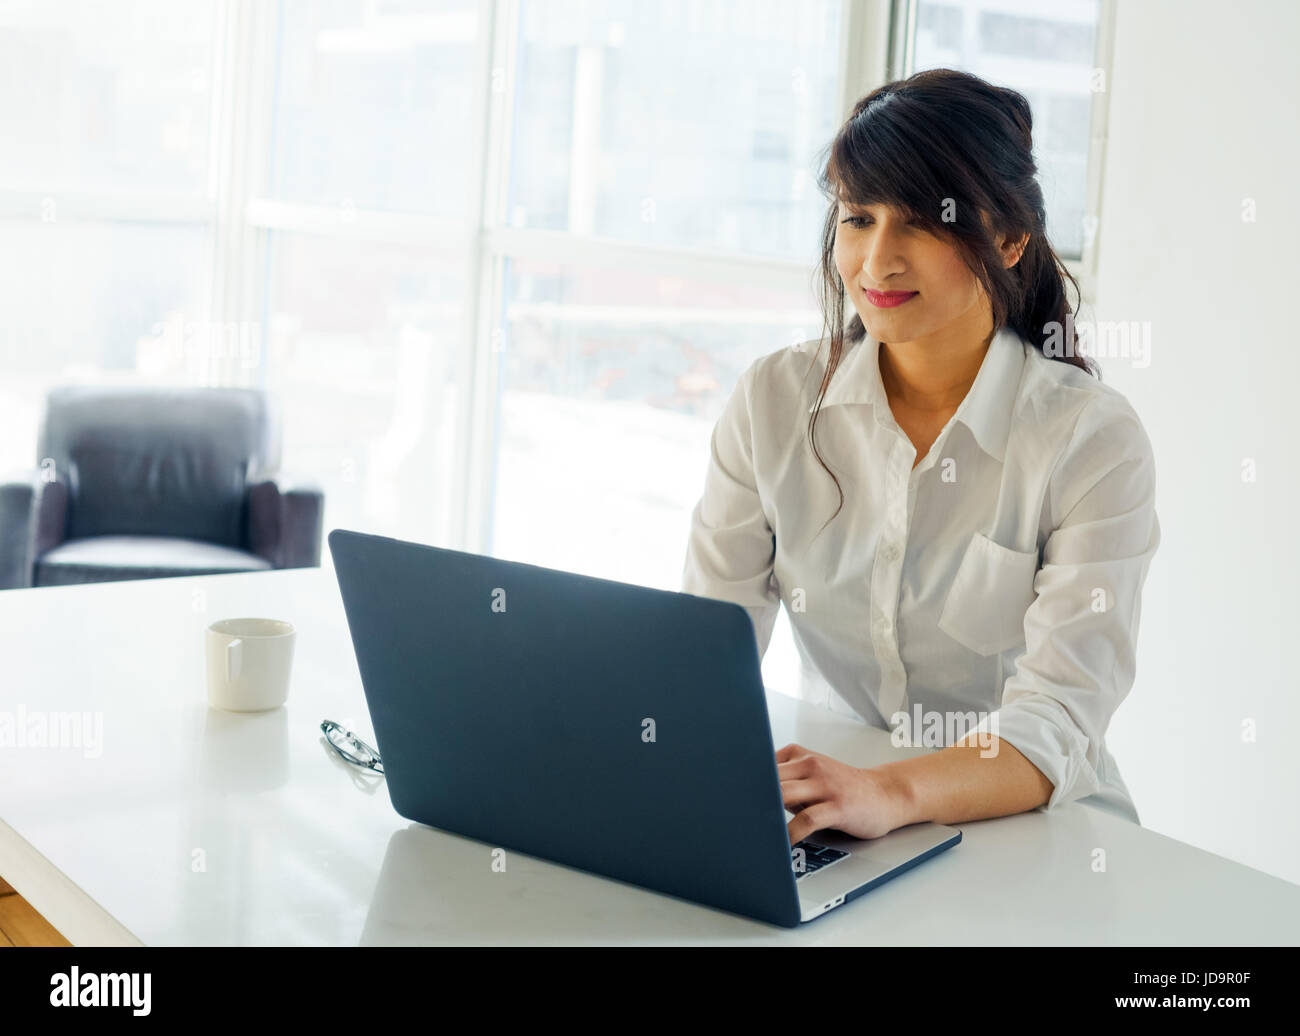 Young woman using laptop at desk, day, with window behind. young adult arabic pretty 20 years old Stock Photo